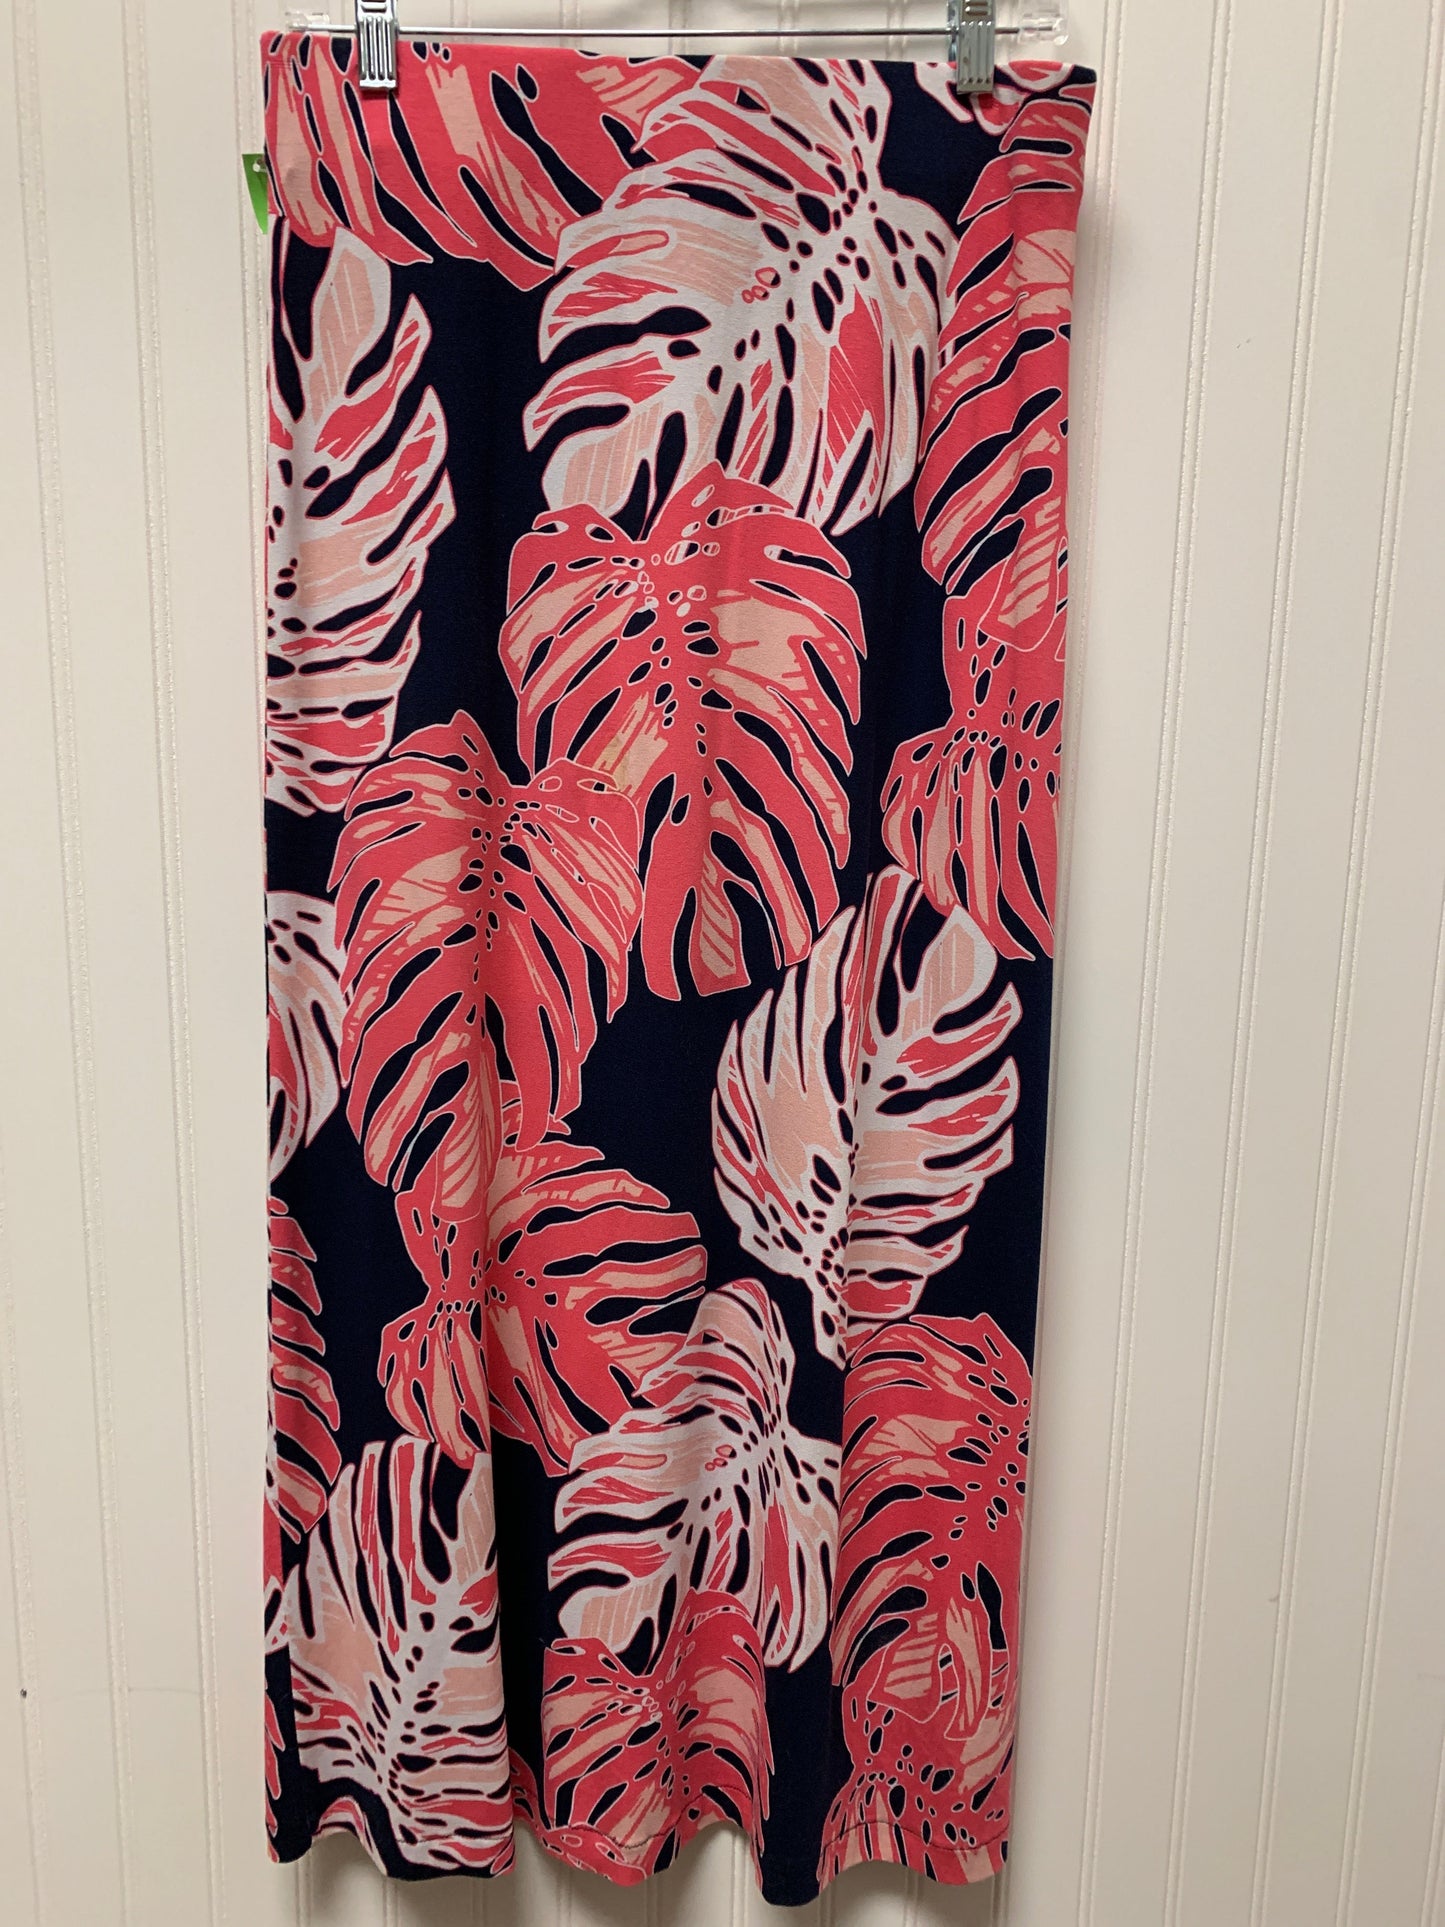 Skirt Maxi By Tommy Bahama  Size: 4petite